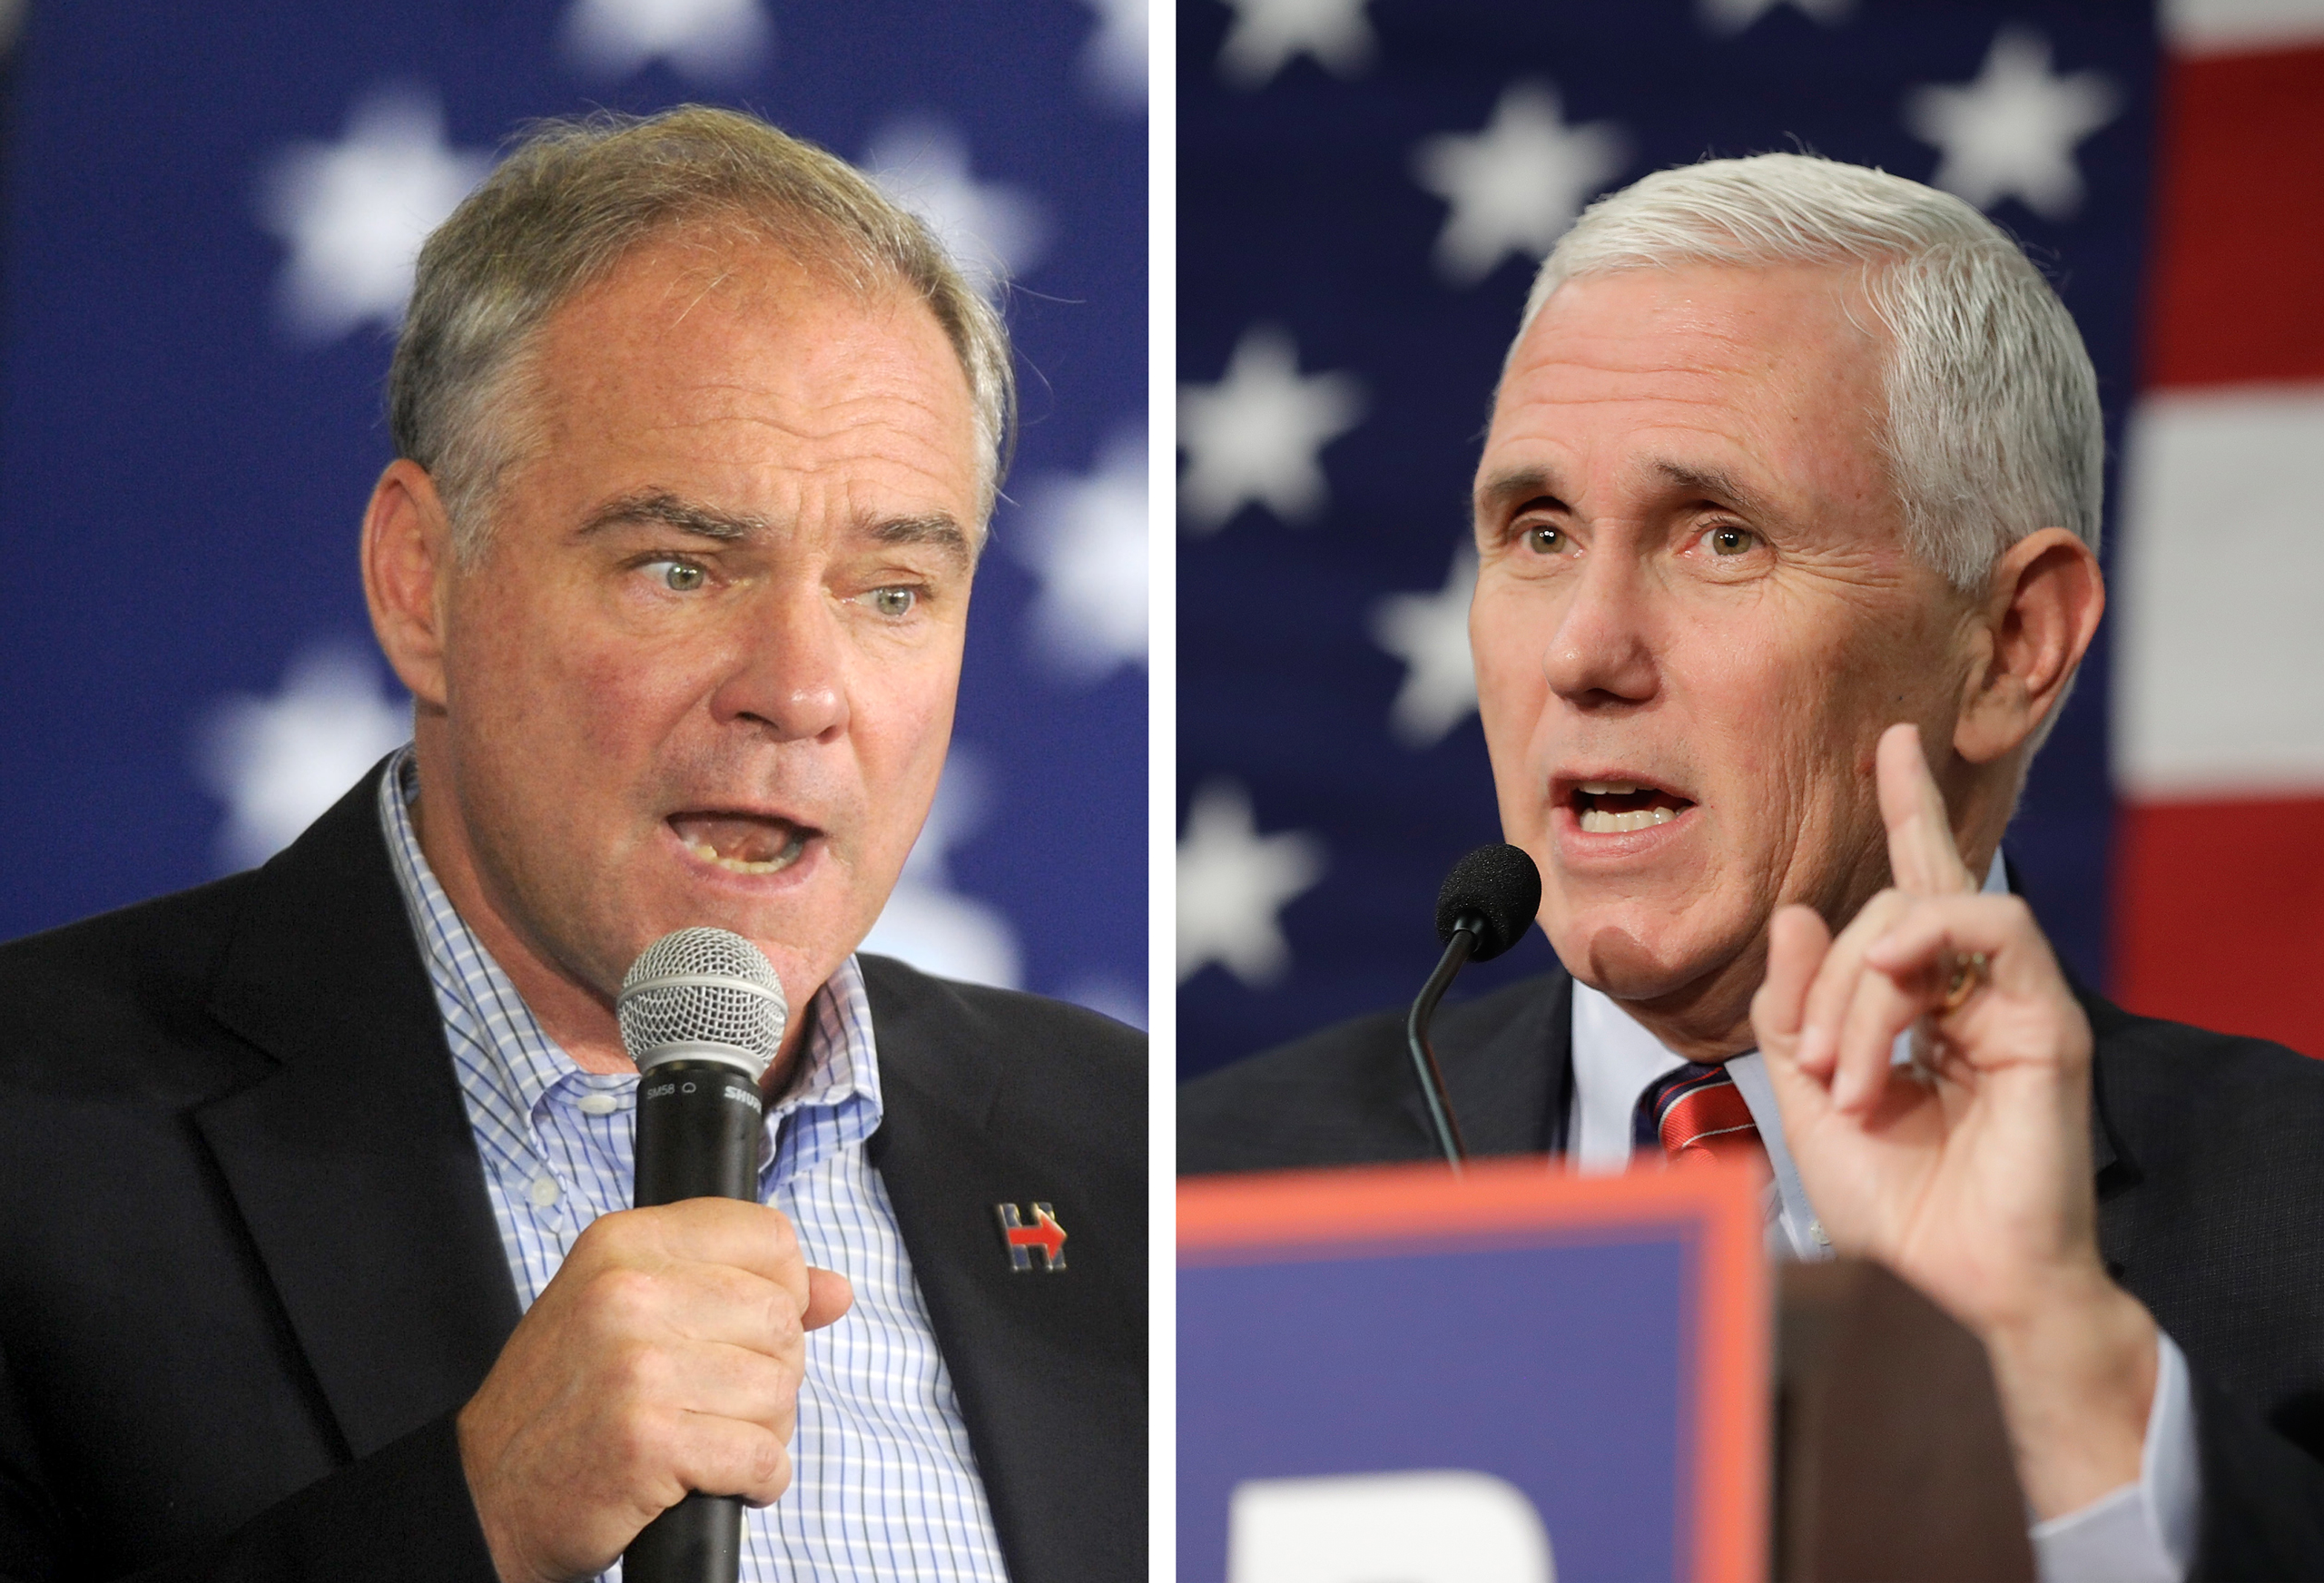 From left: Democratic vice-presidential nominee Tim Kaine speaks at Hanover Township Community Center in Bethlehem, Pa., on Aug. 31, 2016; the Republican vice-presidential candidate, Indiana Governor Mike Pence, speaks at a campaign rally in Fort Wayne, Ind., on Sept. 30, 2016 (Dennis Van Tine—Sipa USA; Darron Cummings—AP)